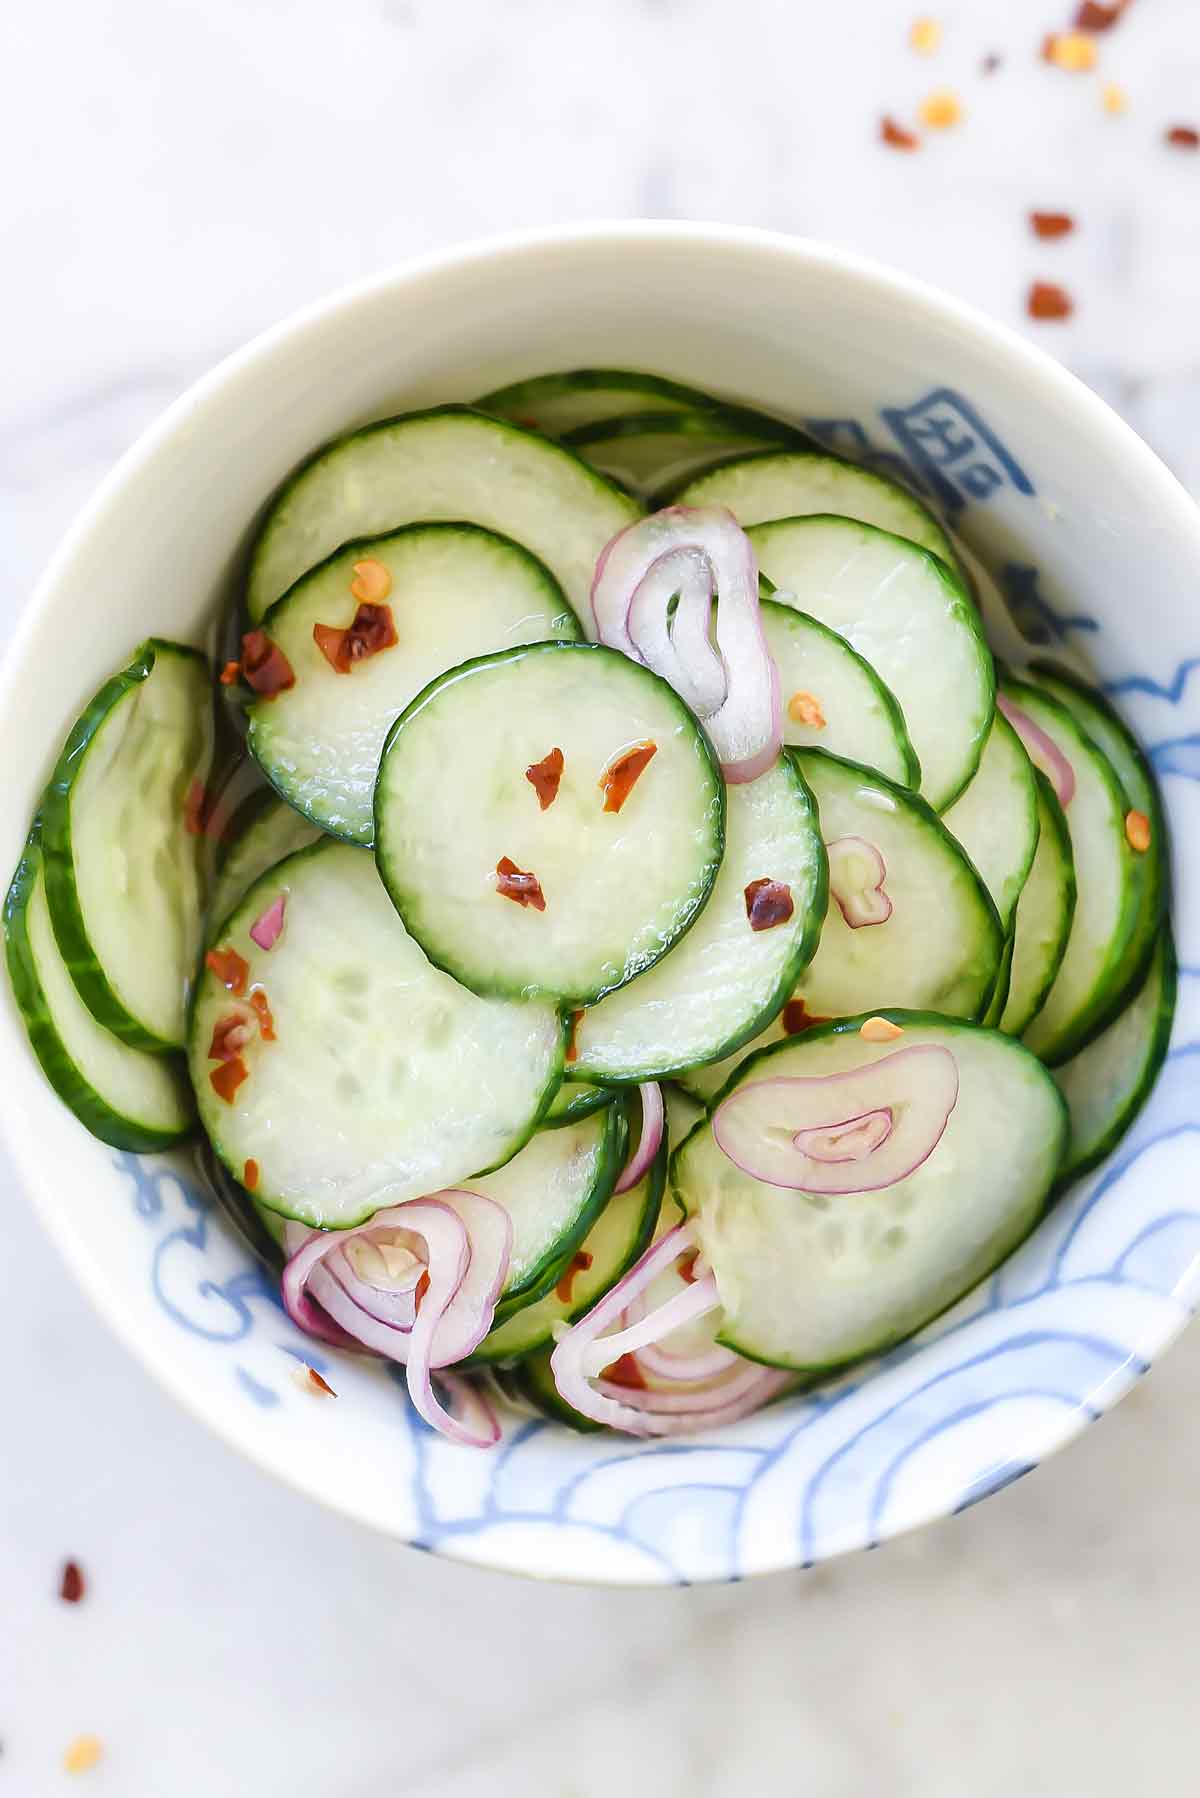 Two fresh green mini cucumbers and sliced half with three slices